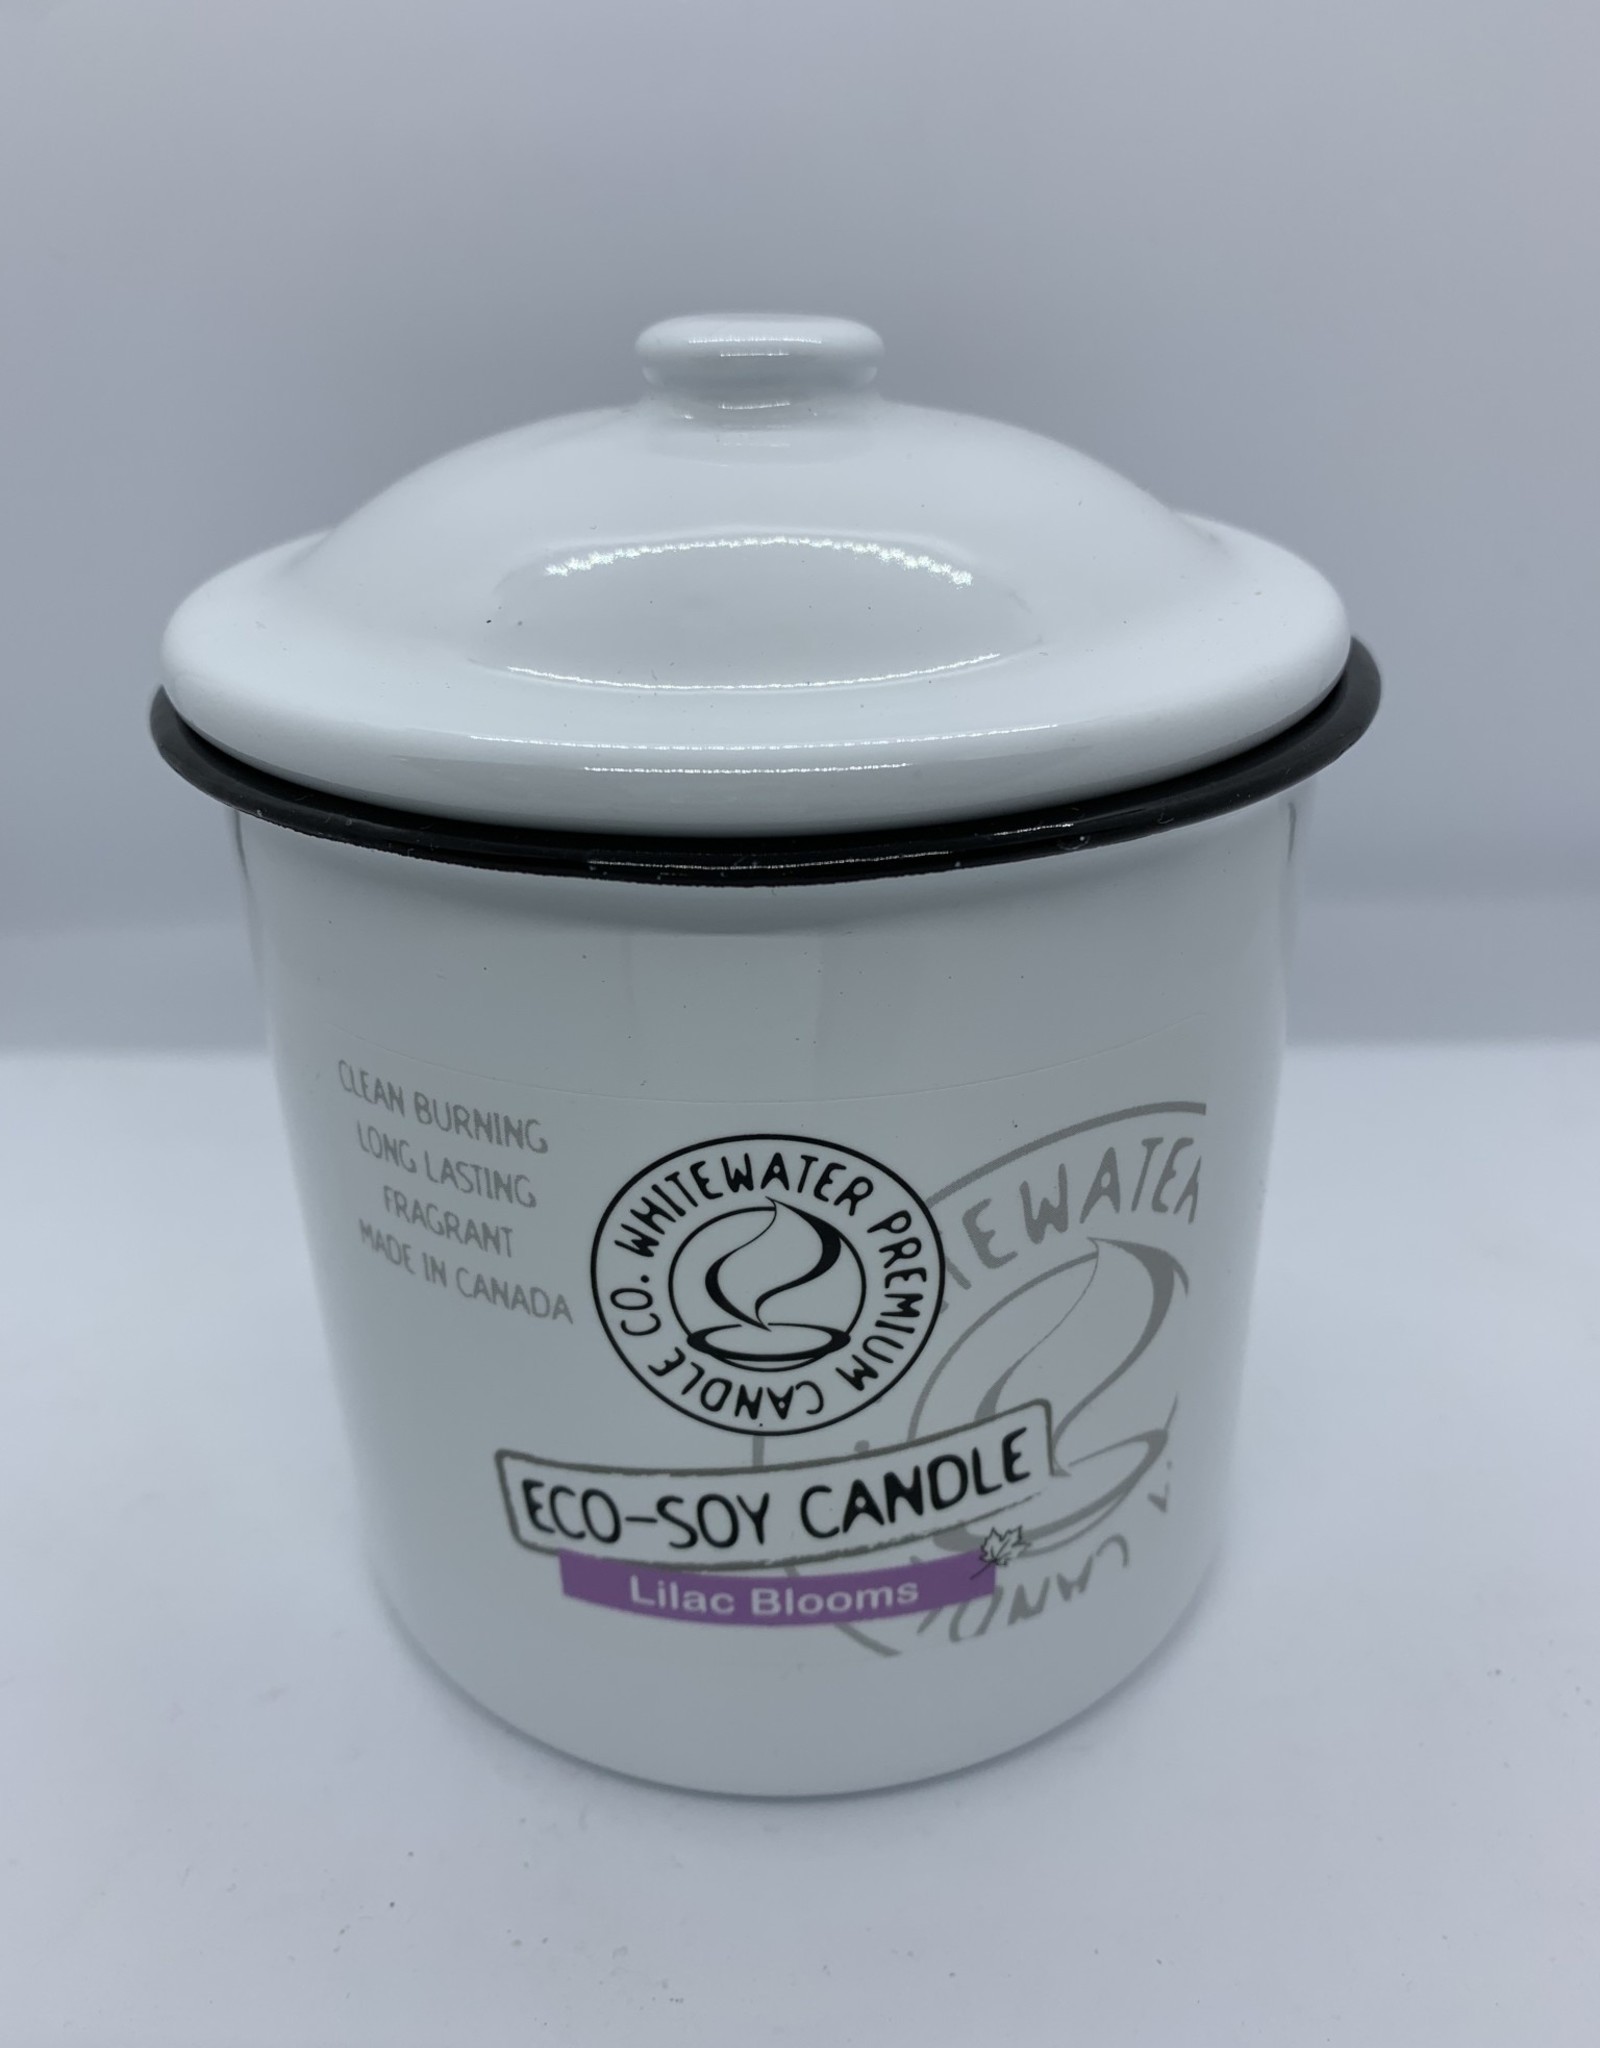 Whitewater Premium Candles Lilac Blooms